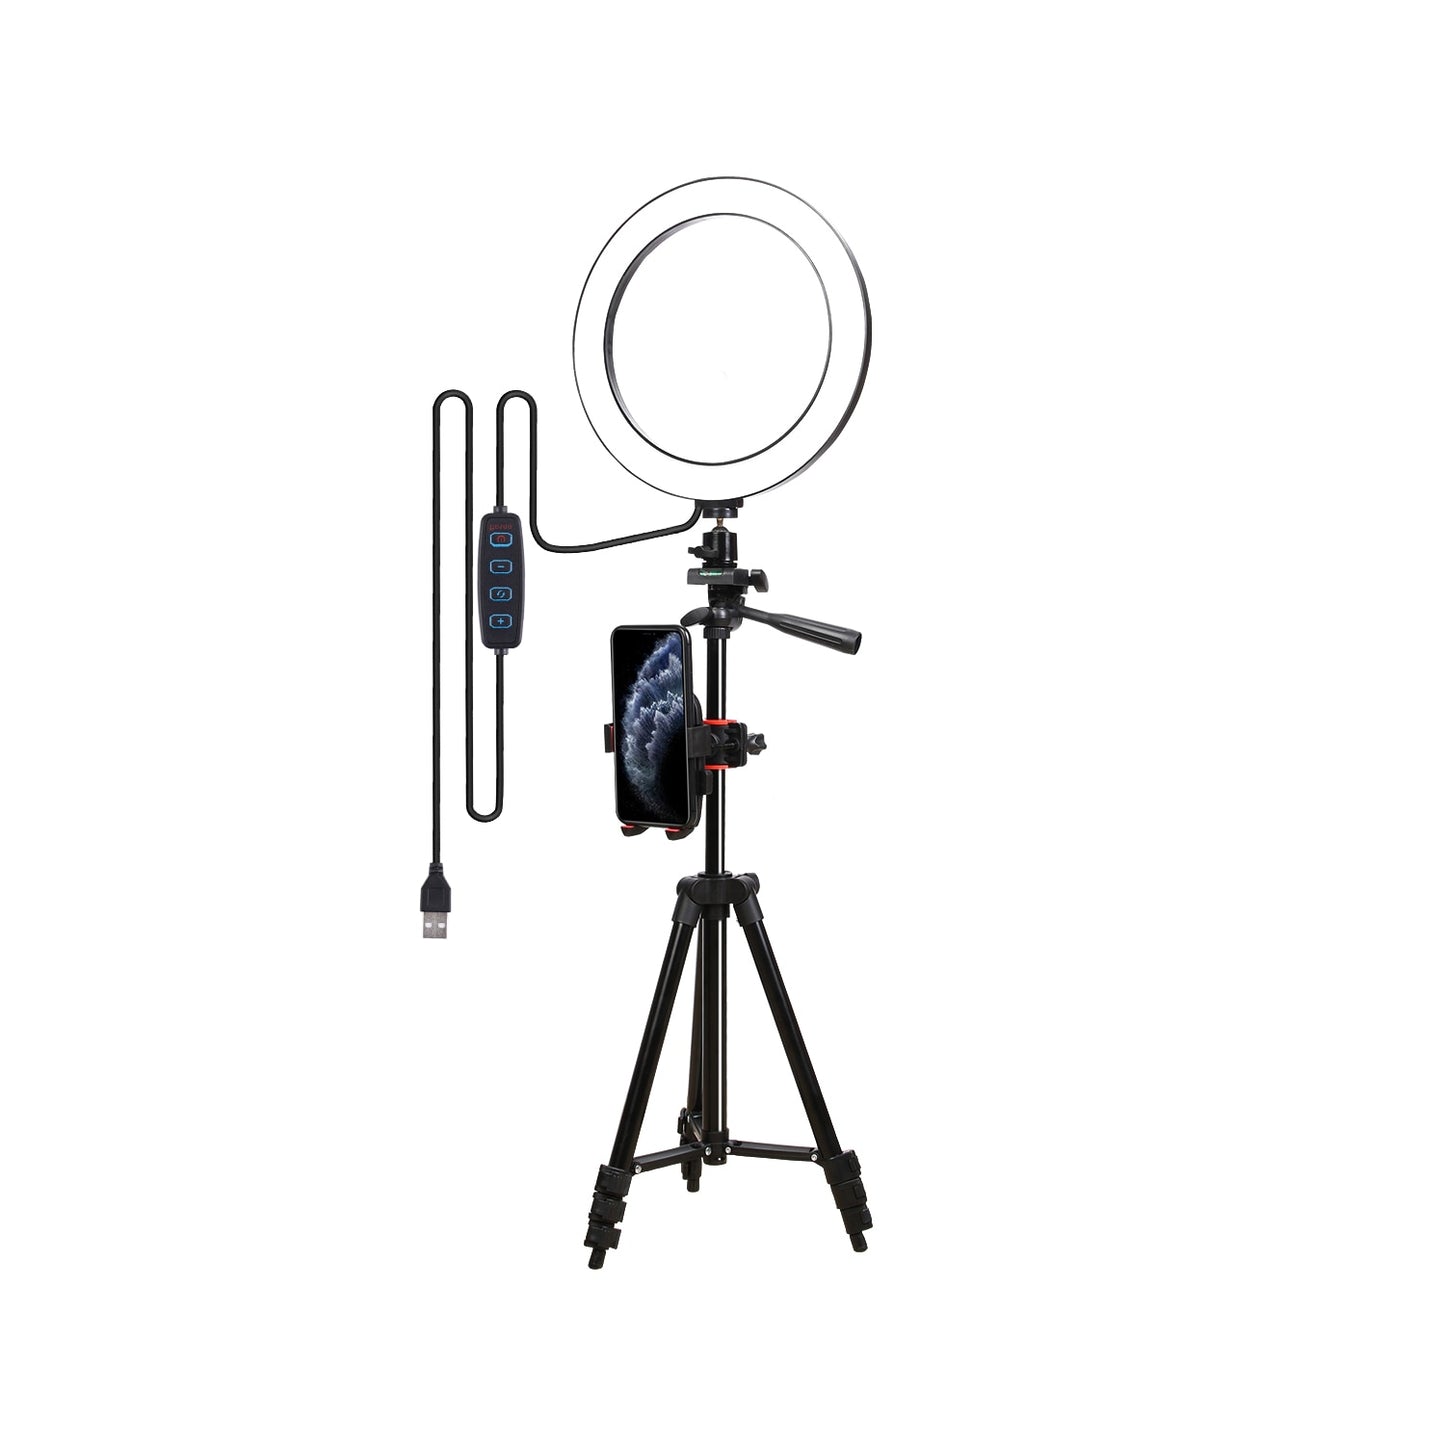 Ring Light Pro 5-in-1 with Adjustable Tripod and Rotatable Phone Holder for Selfie/Makeup/Livestream/TikTok/YouTube Videos